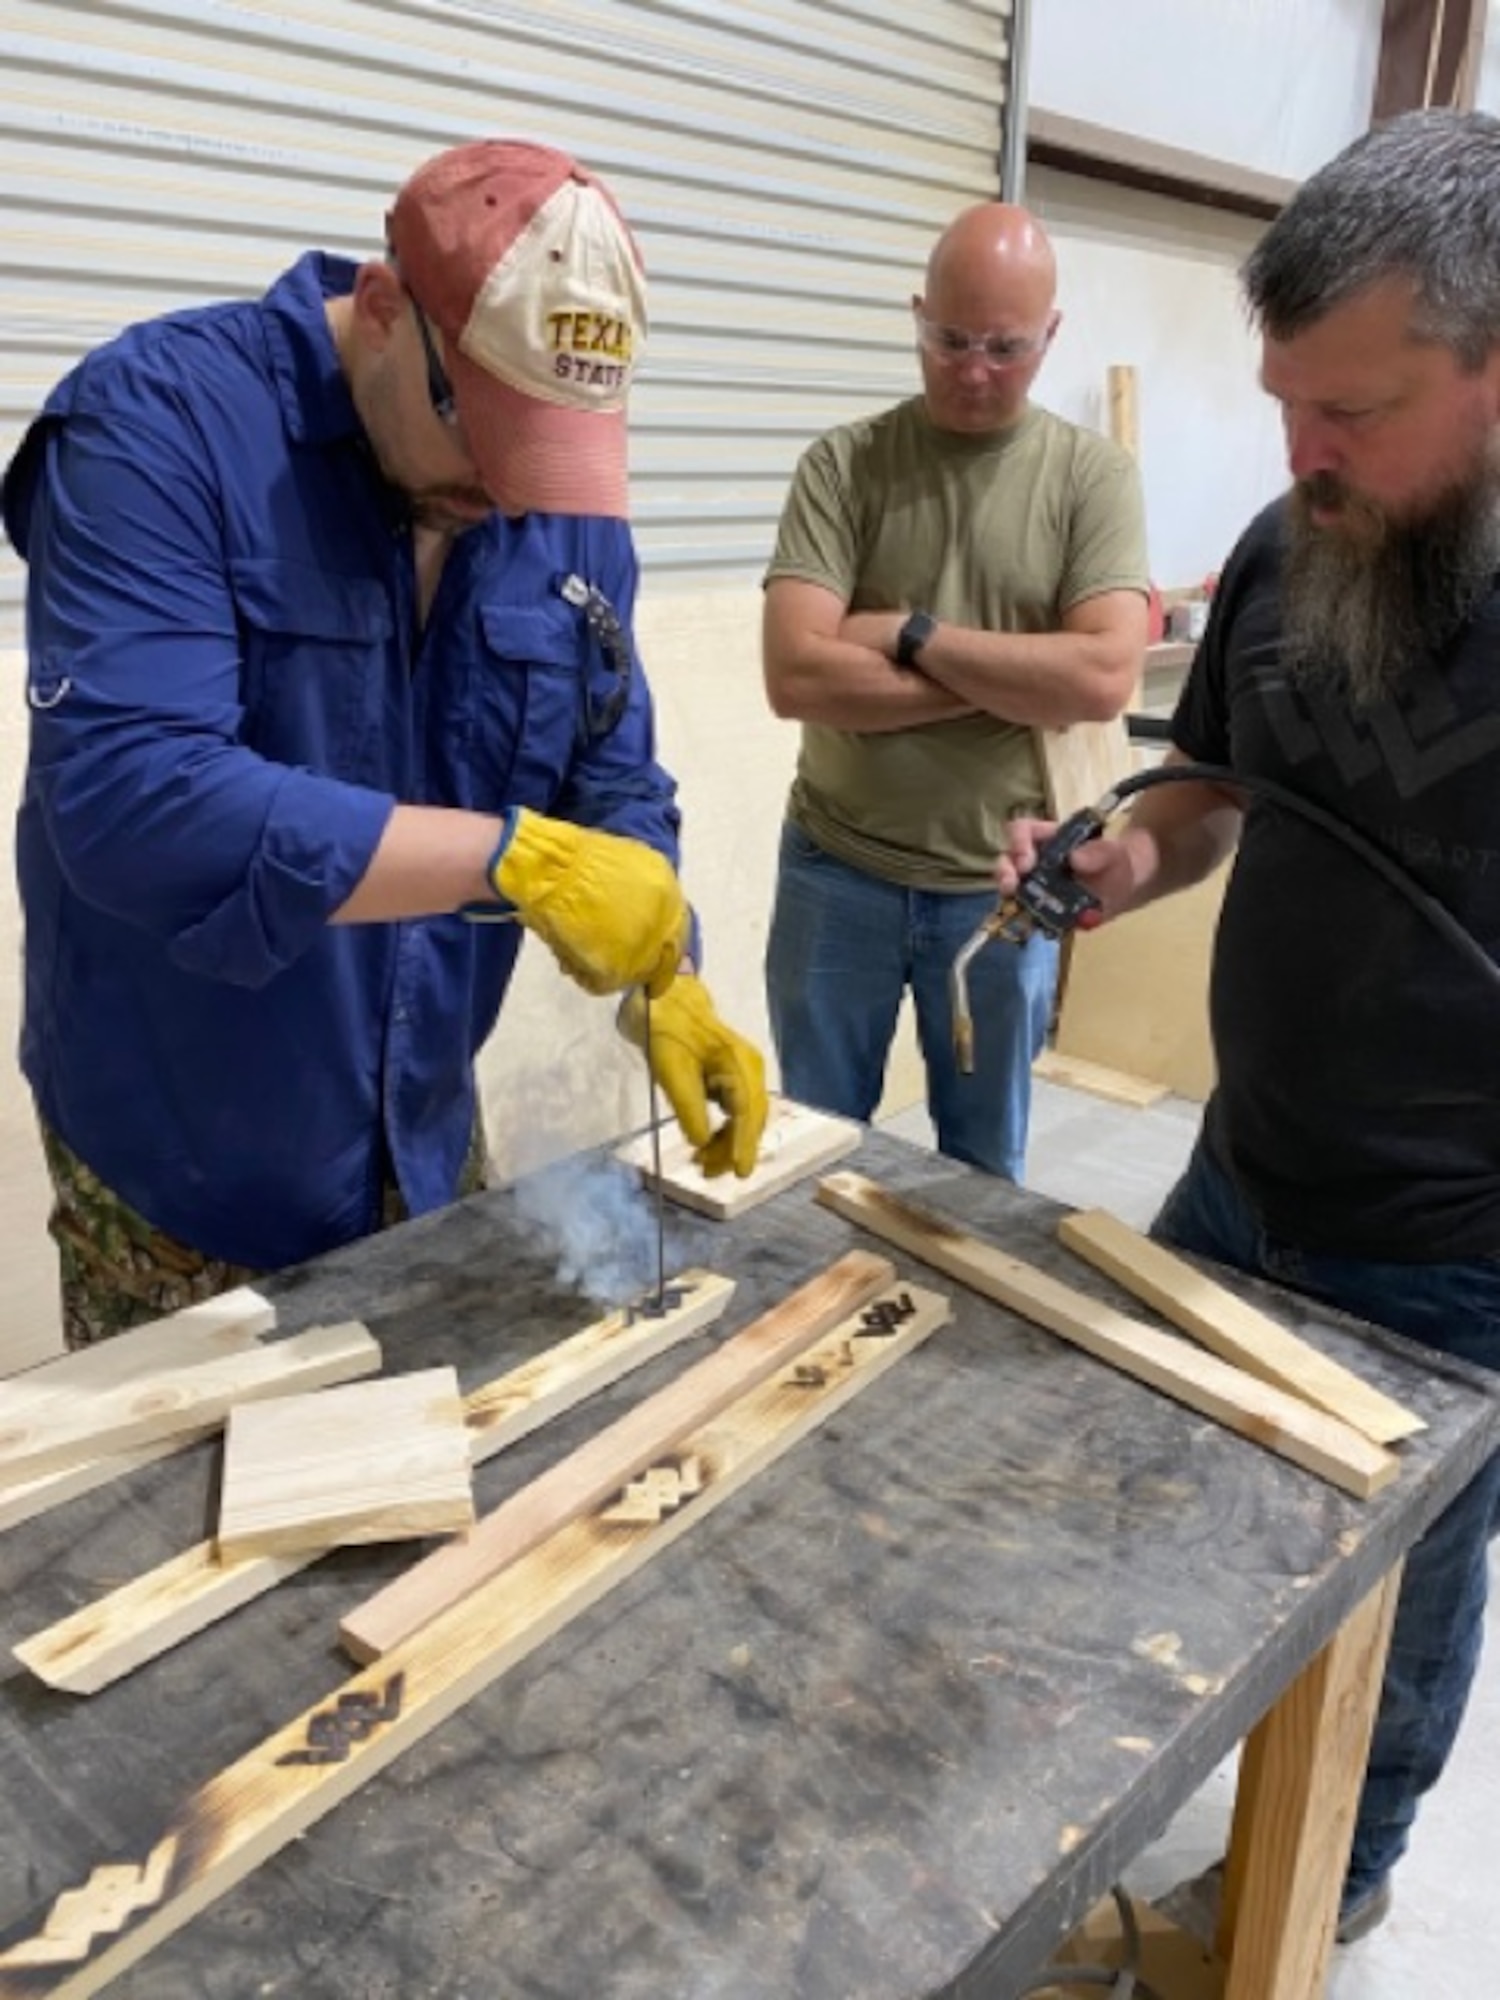 Justin Jordan, Warriors Heart director of business development (right), coaches Bud Boehnke, 960th Cyberspace Wing process manager (left), and Senior Master Sgt. Ryan Dirnberg, 960th Cyberspace Operations Group standardization and evaluation superintendent, as they learn how to burn decorations into wood May 31, 2022, at the Warriors Heart Treatment Center in Bandera, Texas